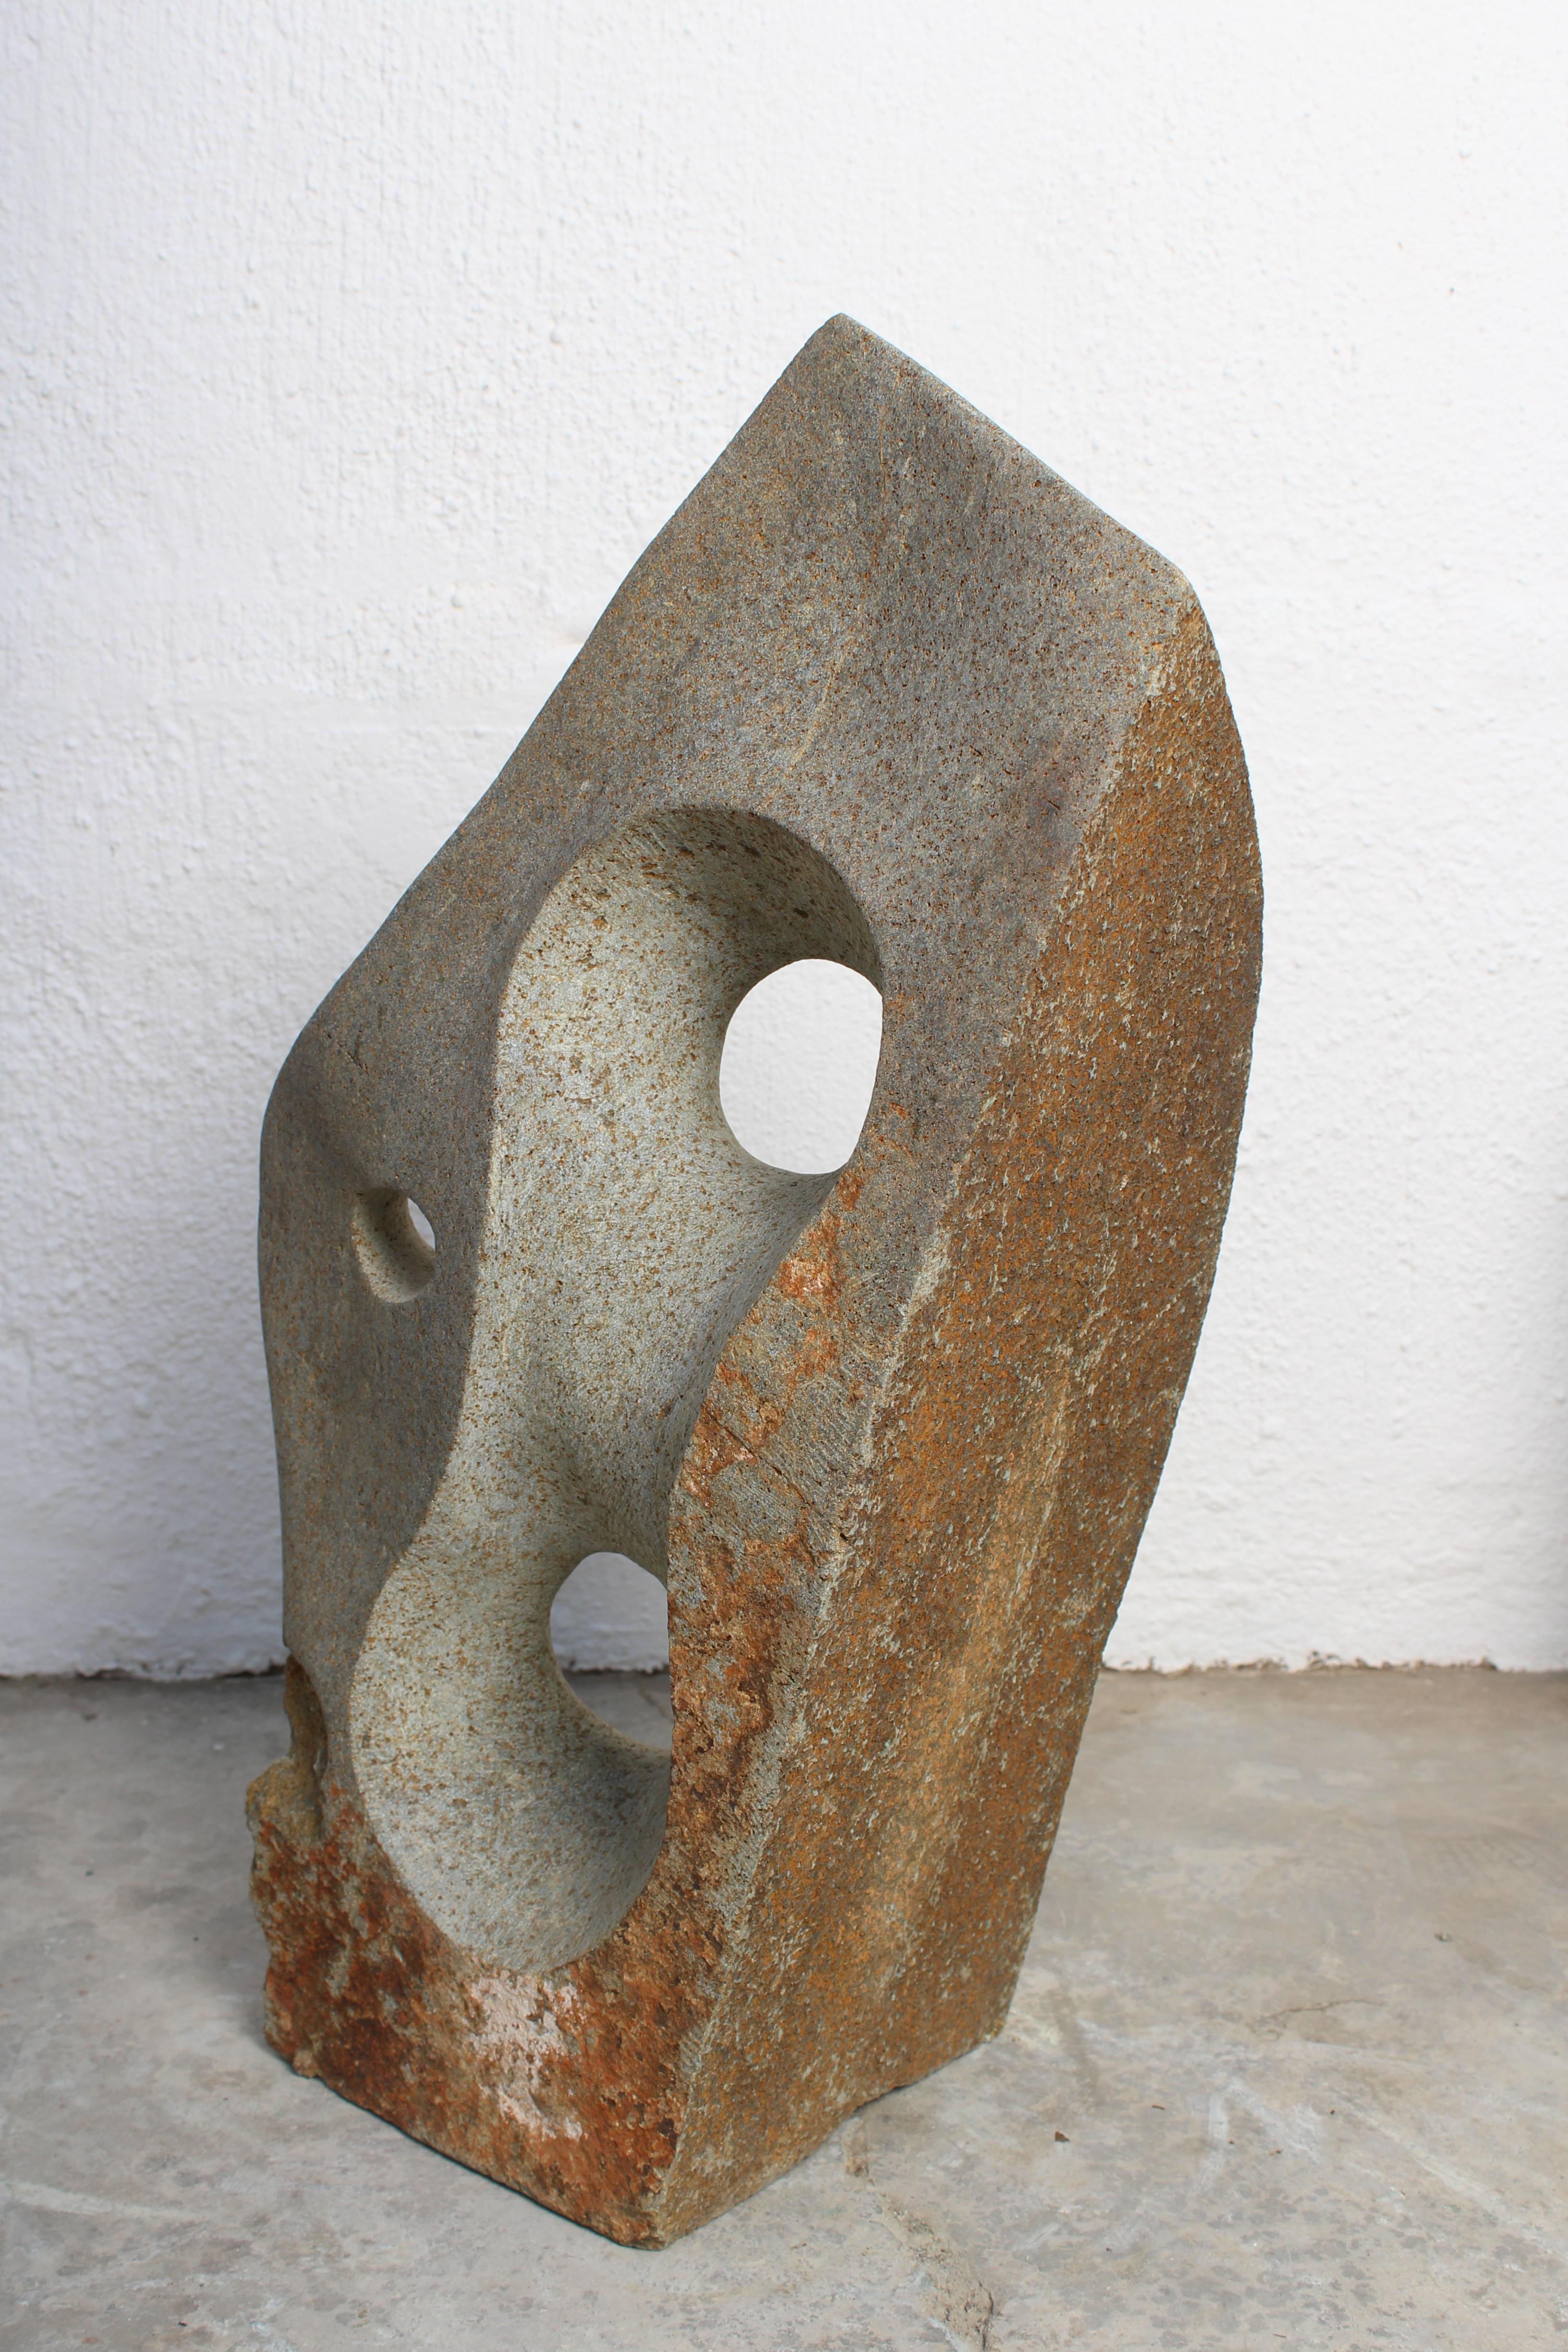 This artwork formed part of Ismael Shivute's 2022 solo exhibition 'I keep my circle small' hosted in Windhoek, Namibia.

Hailing from northern Namibia, Ismael Shivute studied Sculpture and Product Development in the Department of Visual Arts at the